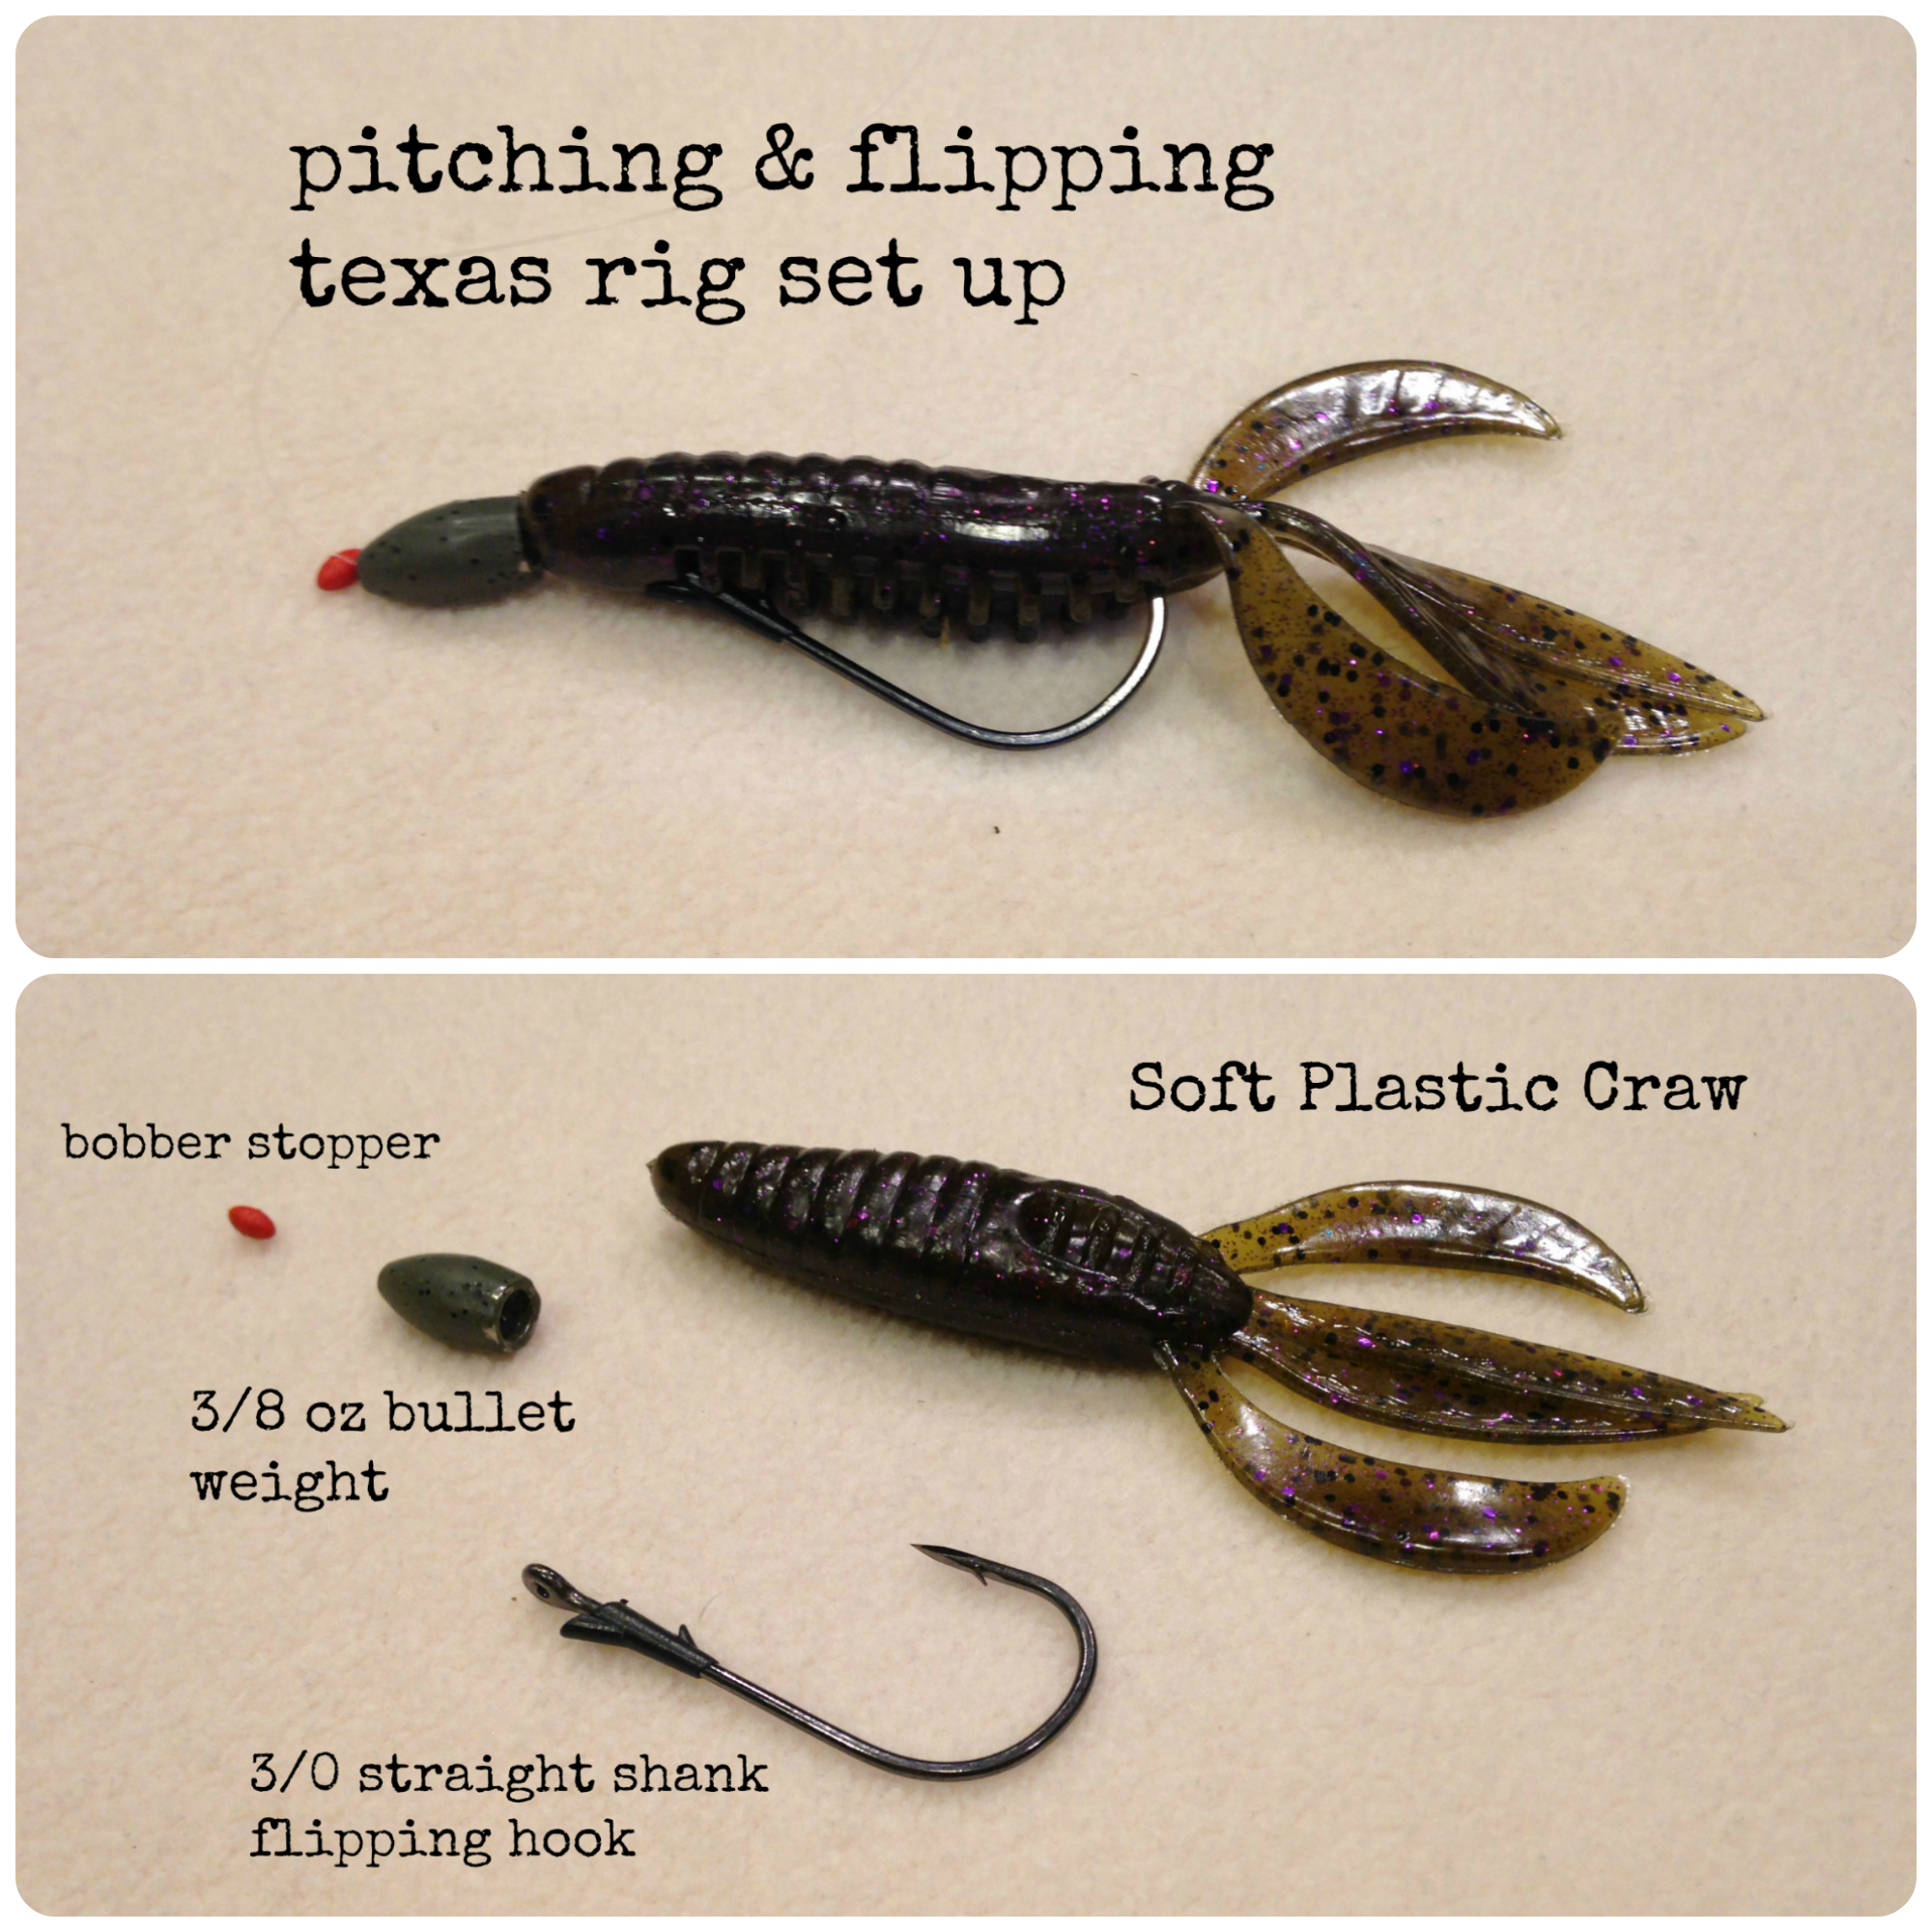 pitching and flipping texas rig